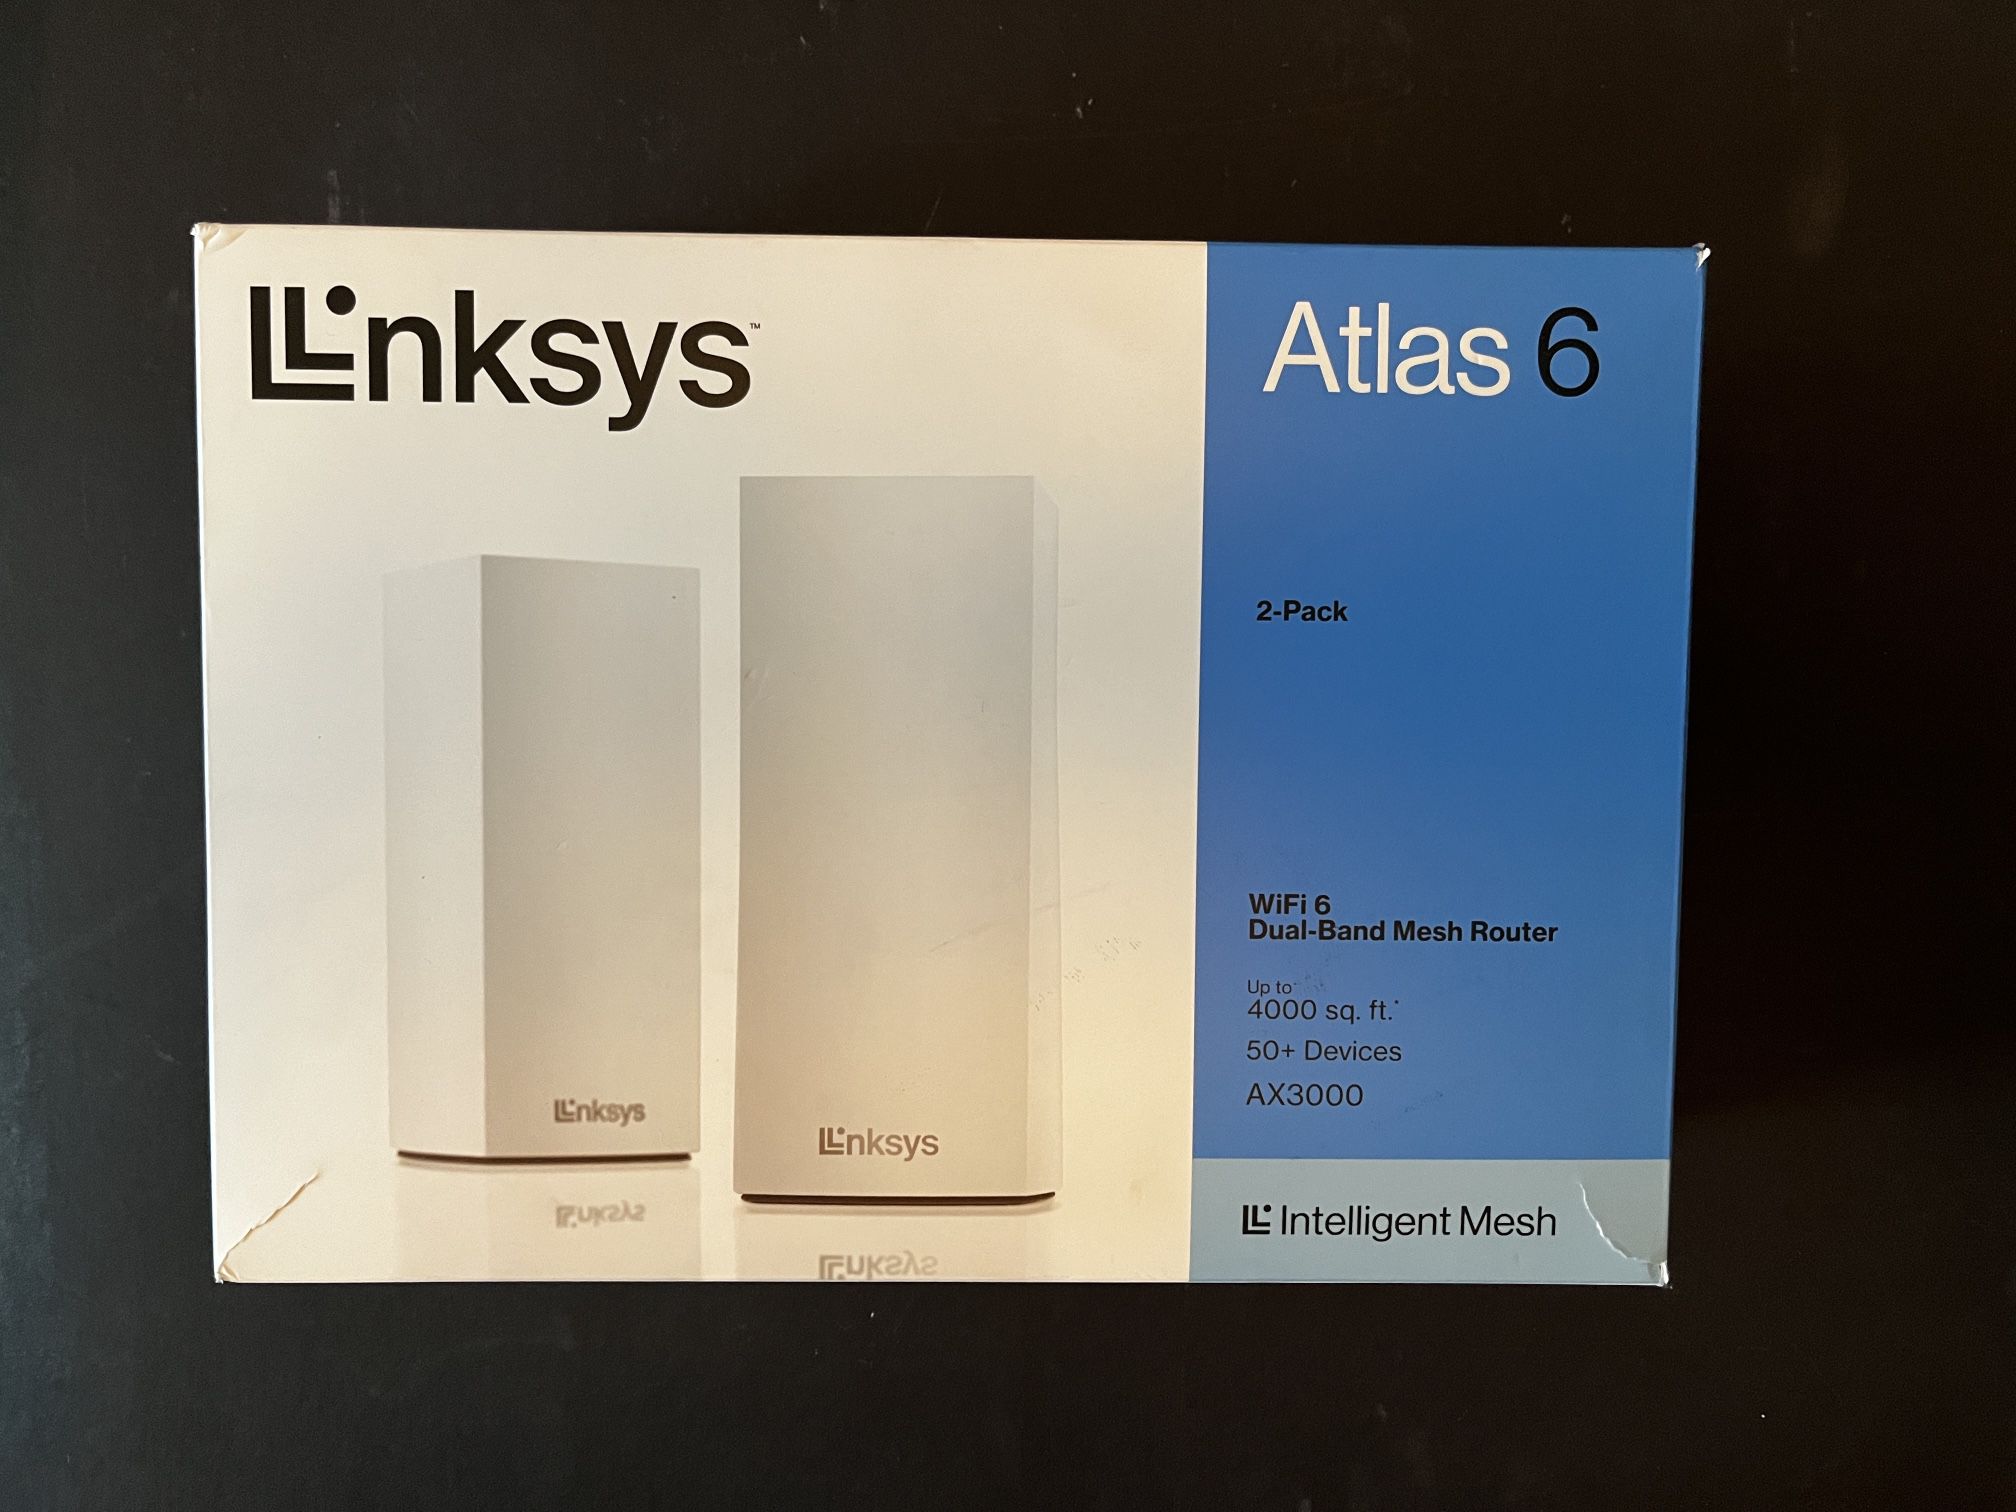 Linksys ATLAS 6 AX3000 Dual-Band WIFI 6 Mesh Router 2-Pack MX2002 OPENED BUT NEVER USED